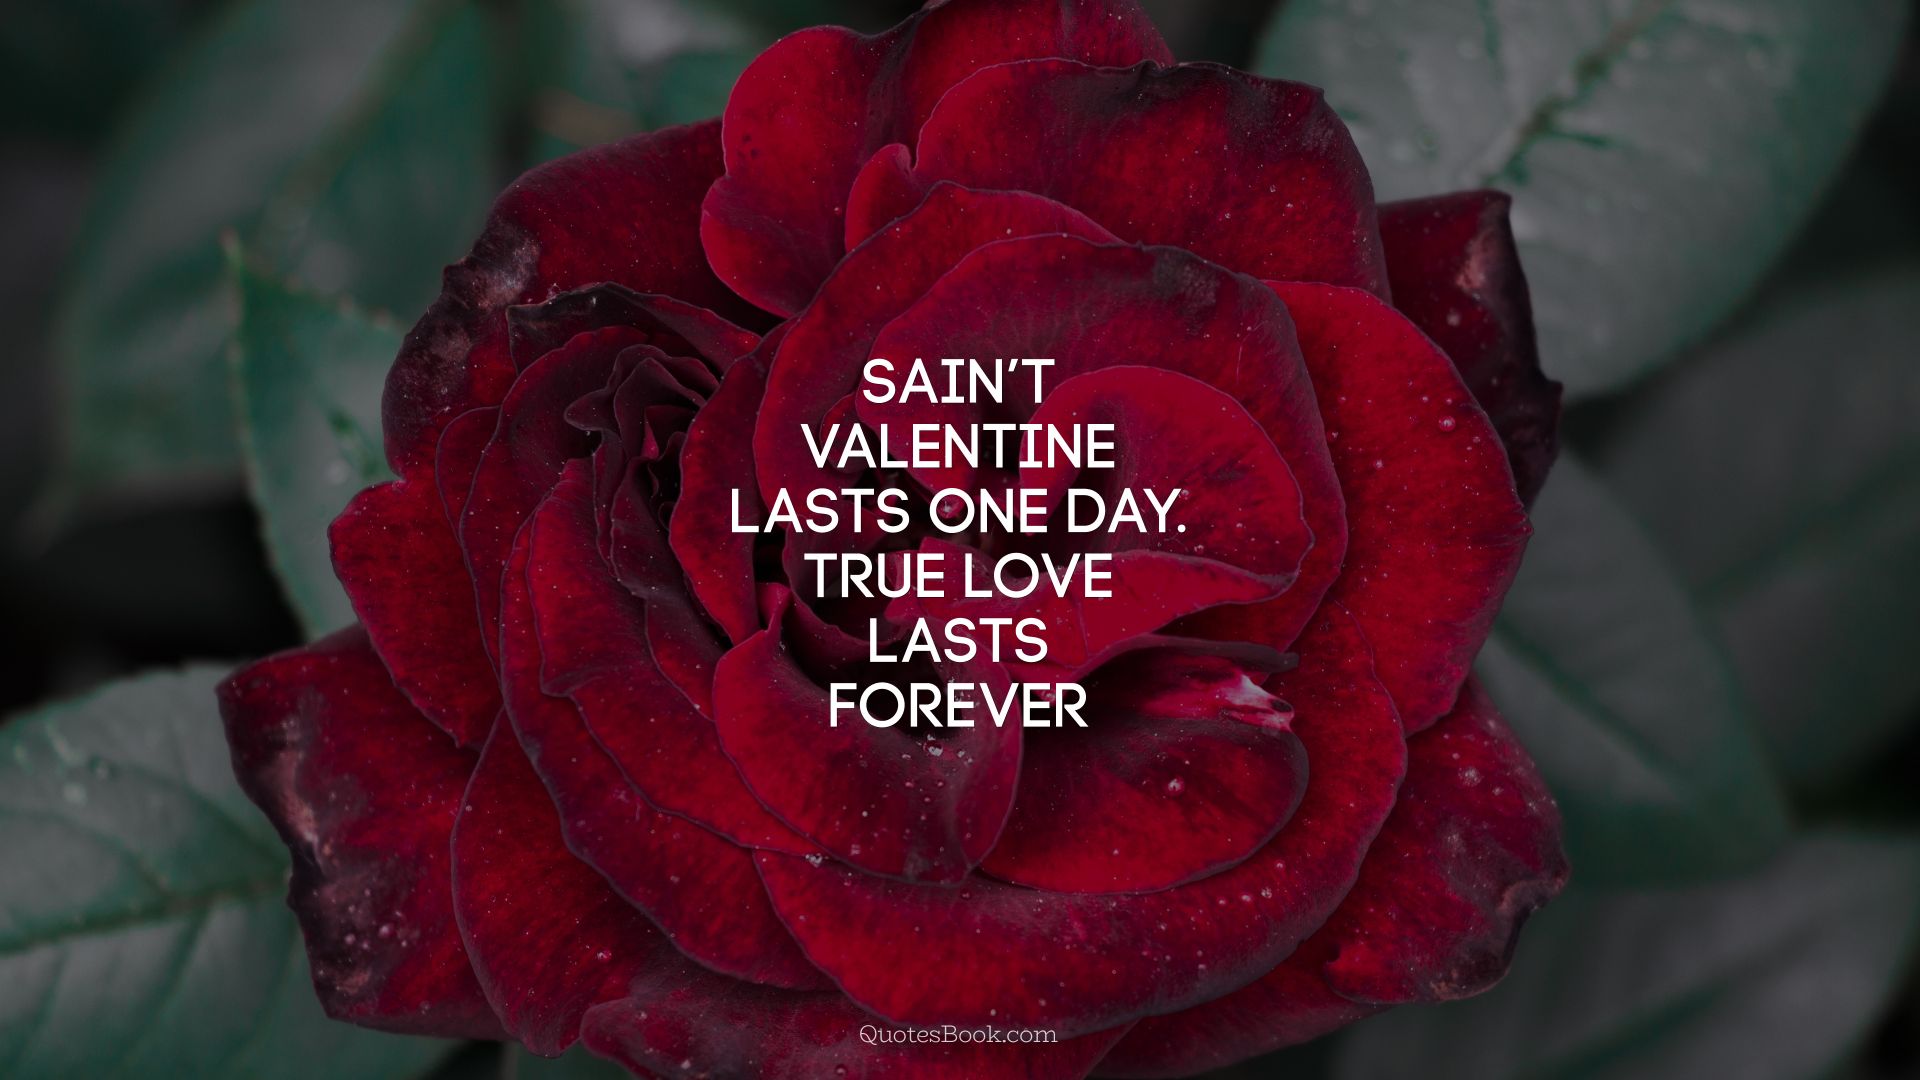 Sain’t Valentine lasts one day. True love lasts forever